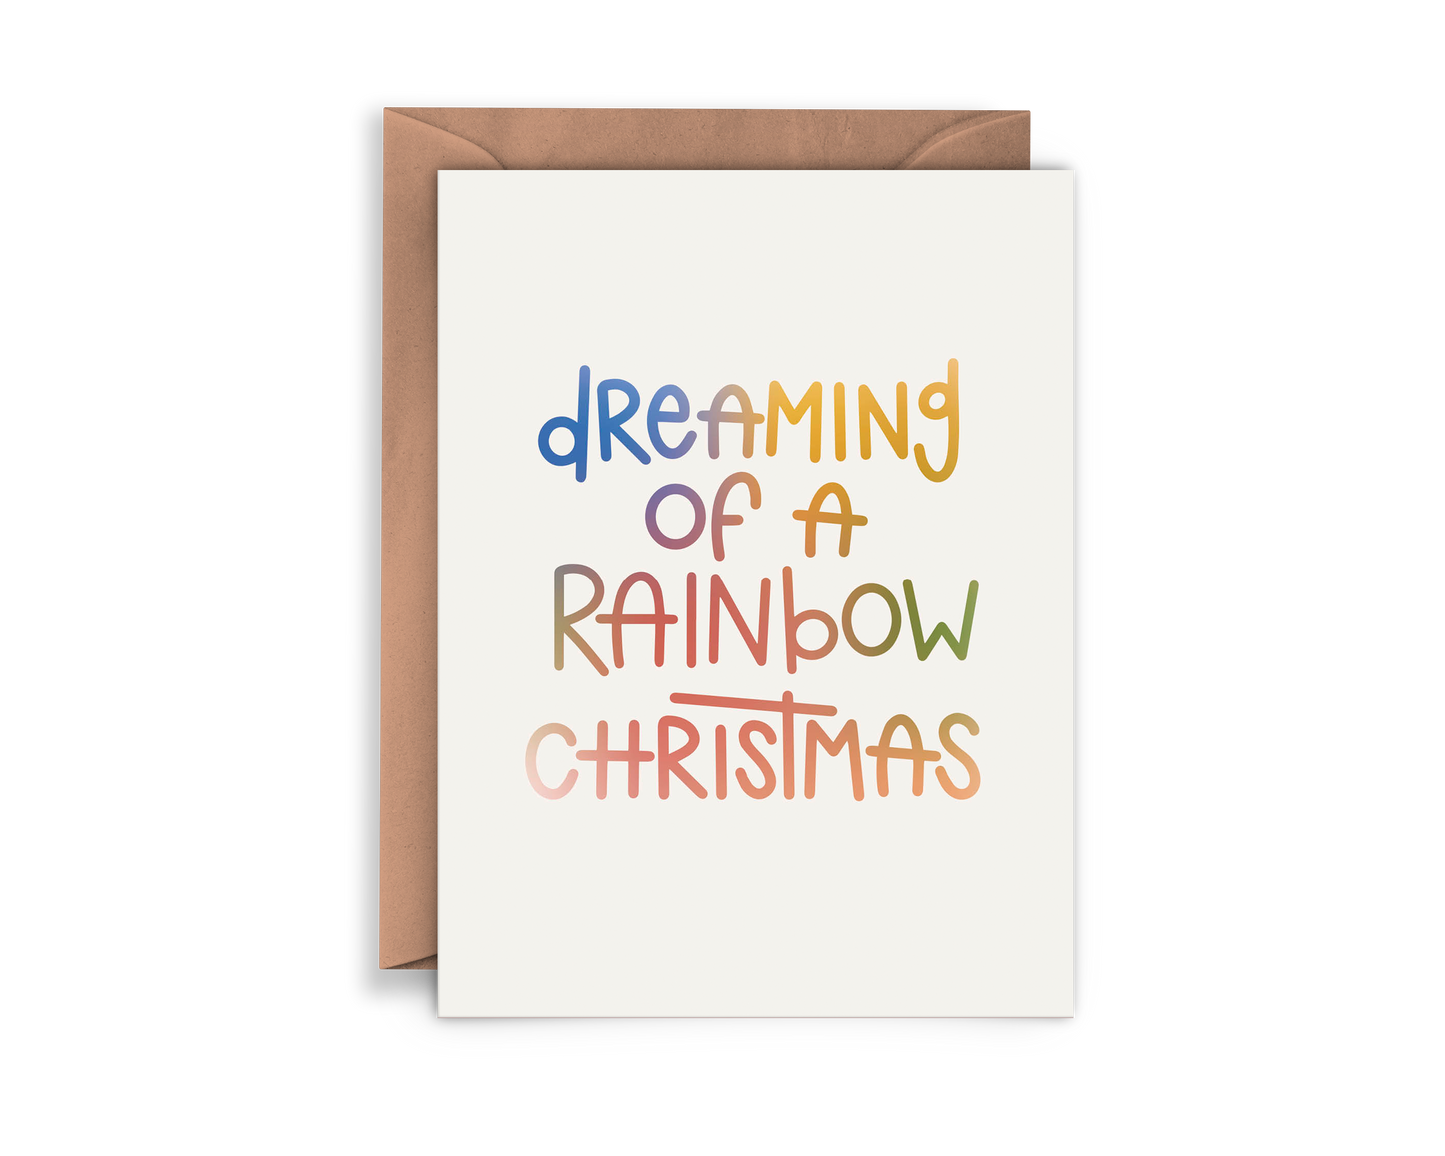 Dreaming of a Rainbow Christmas